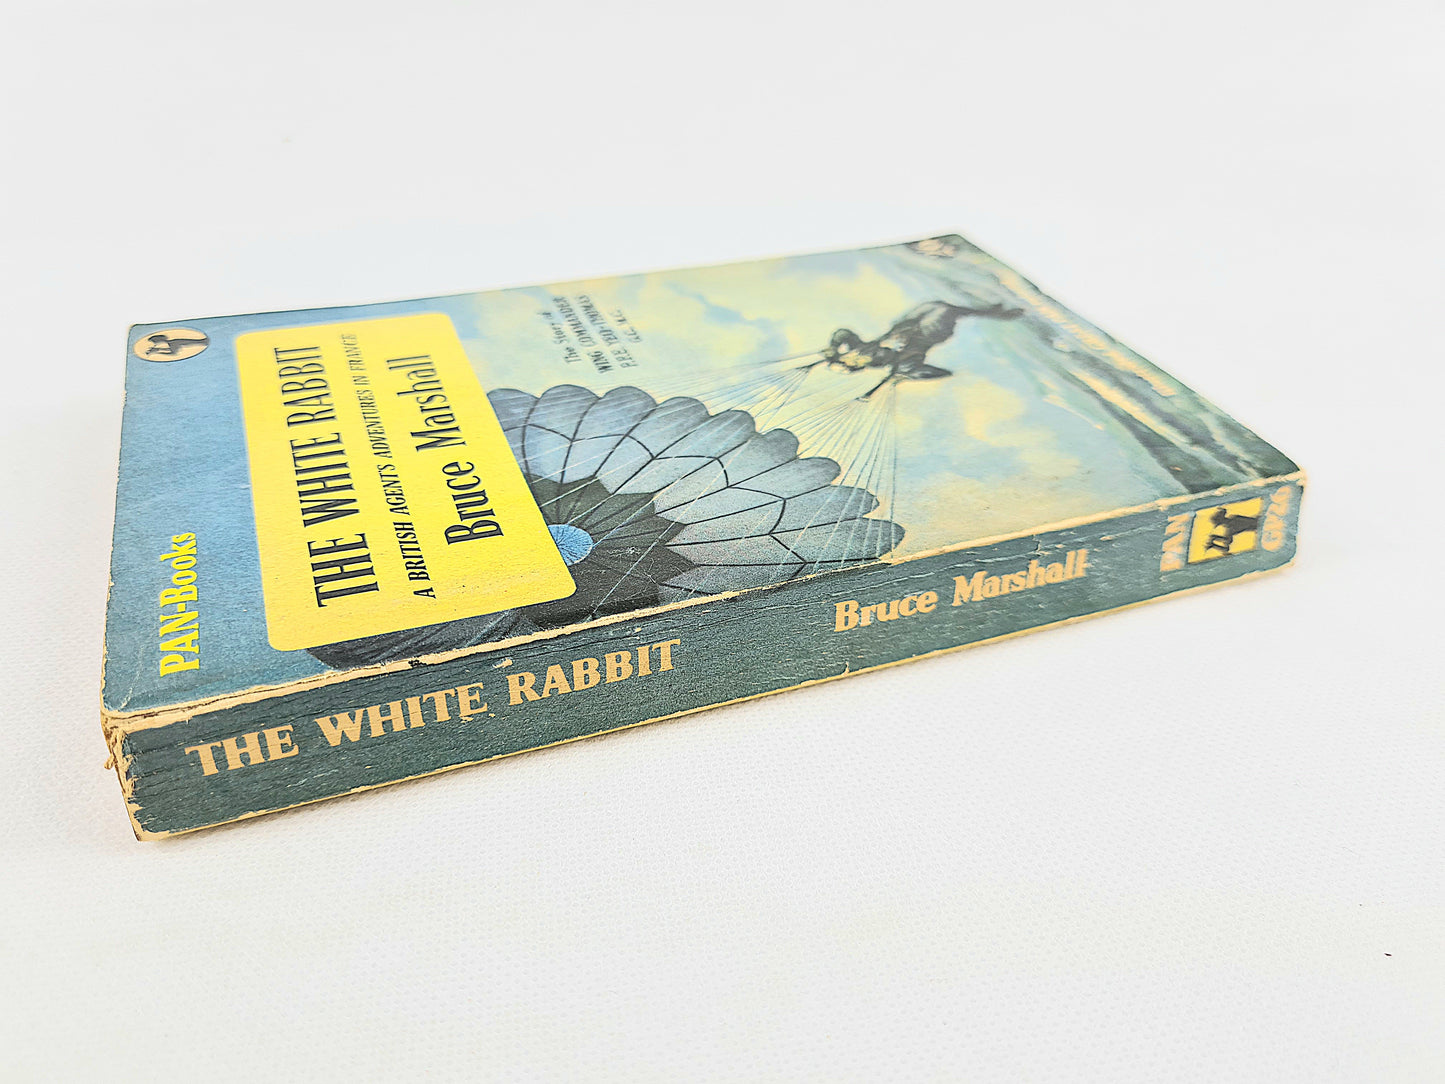 The White Rabbit by Bruce Marshall, a British agents adventures in France. Vintage Pan books GP26